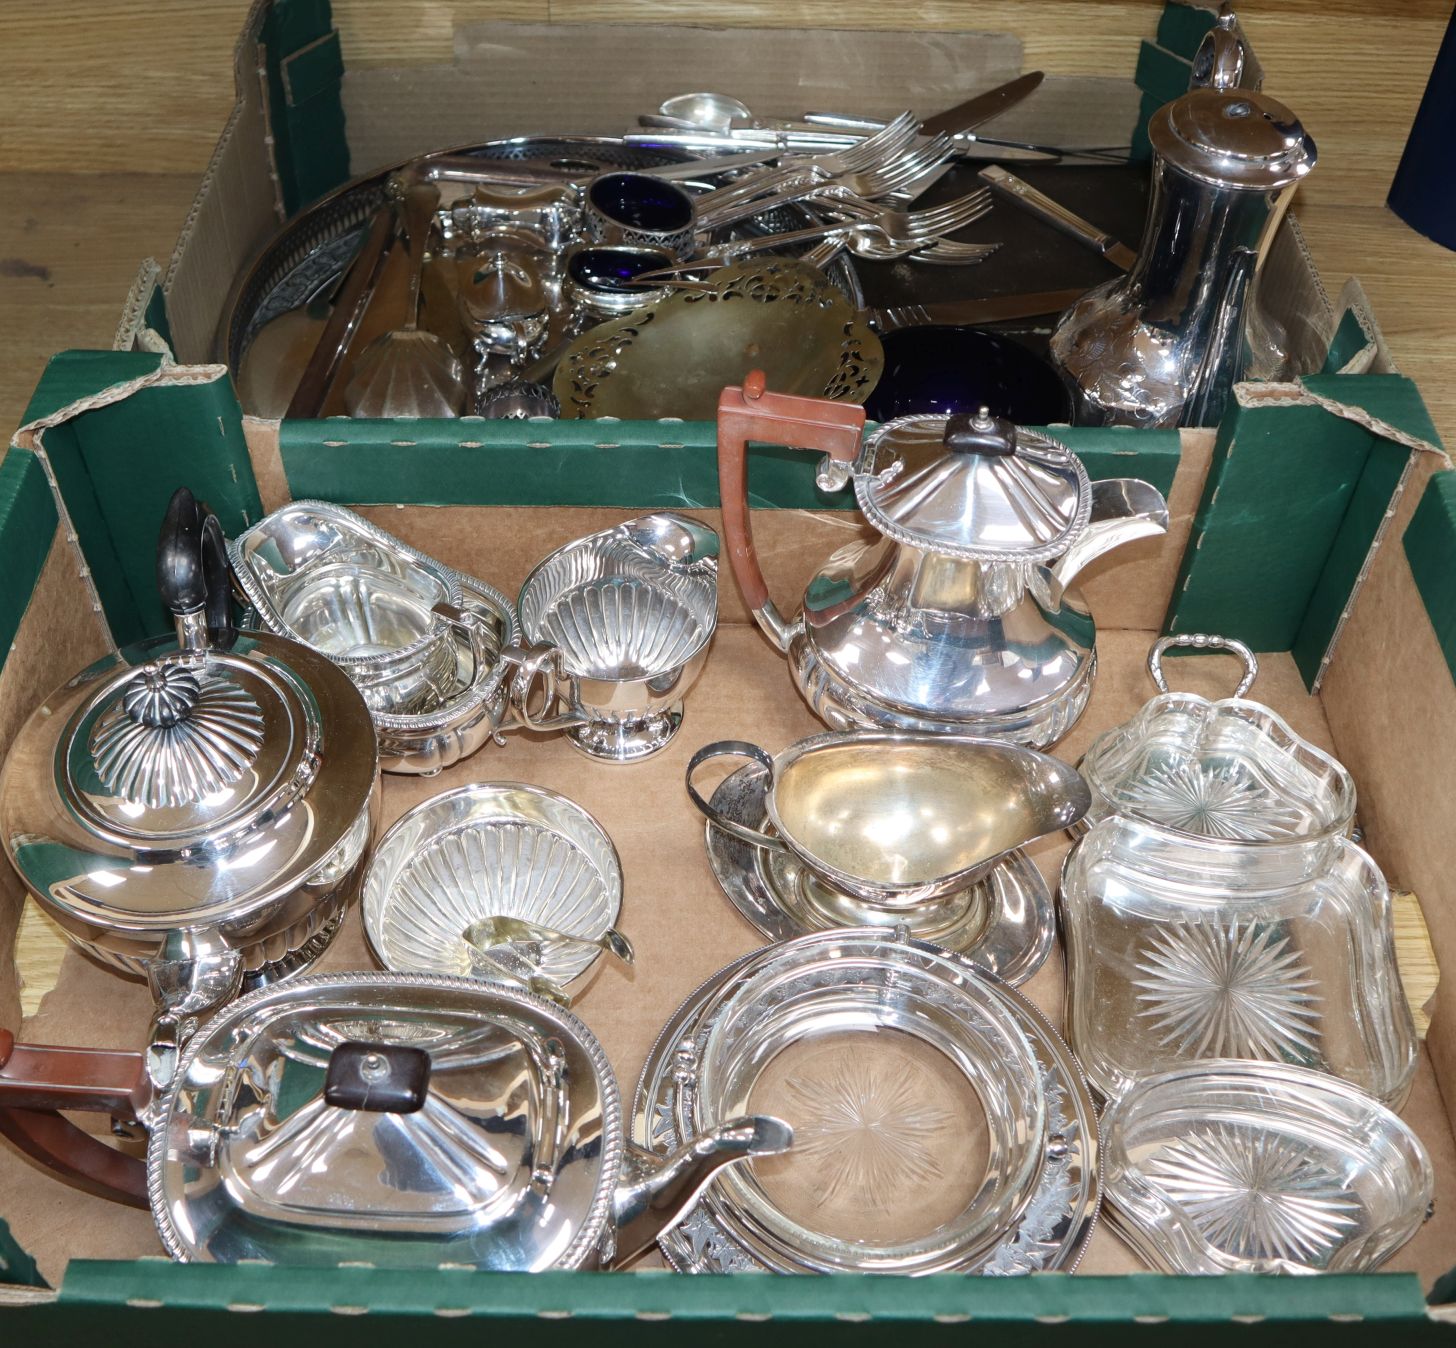 A quantity of assorted plated wares including a butter dish, hors d'oeuvres dish, flatware, tea